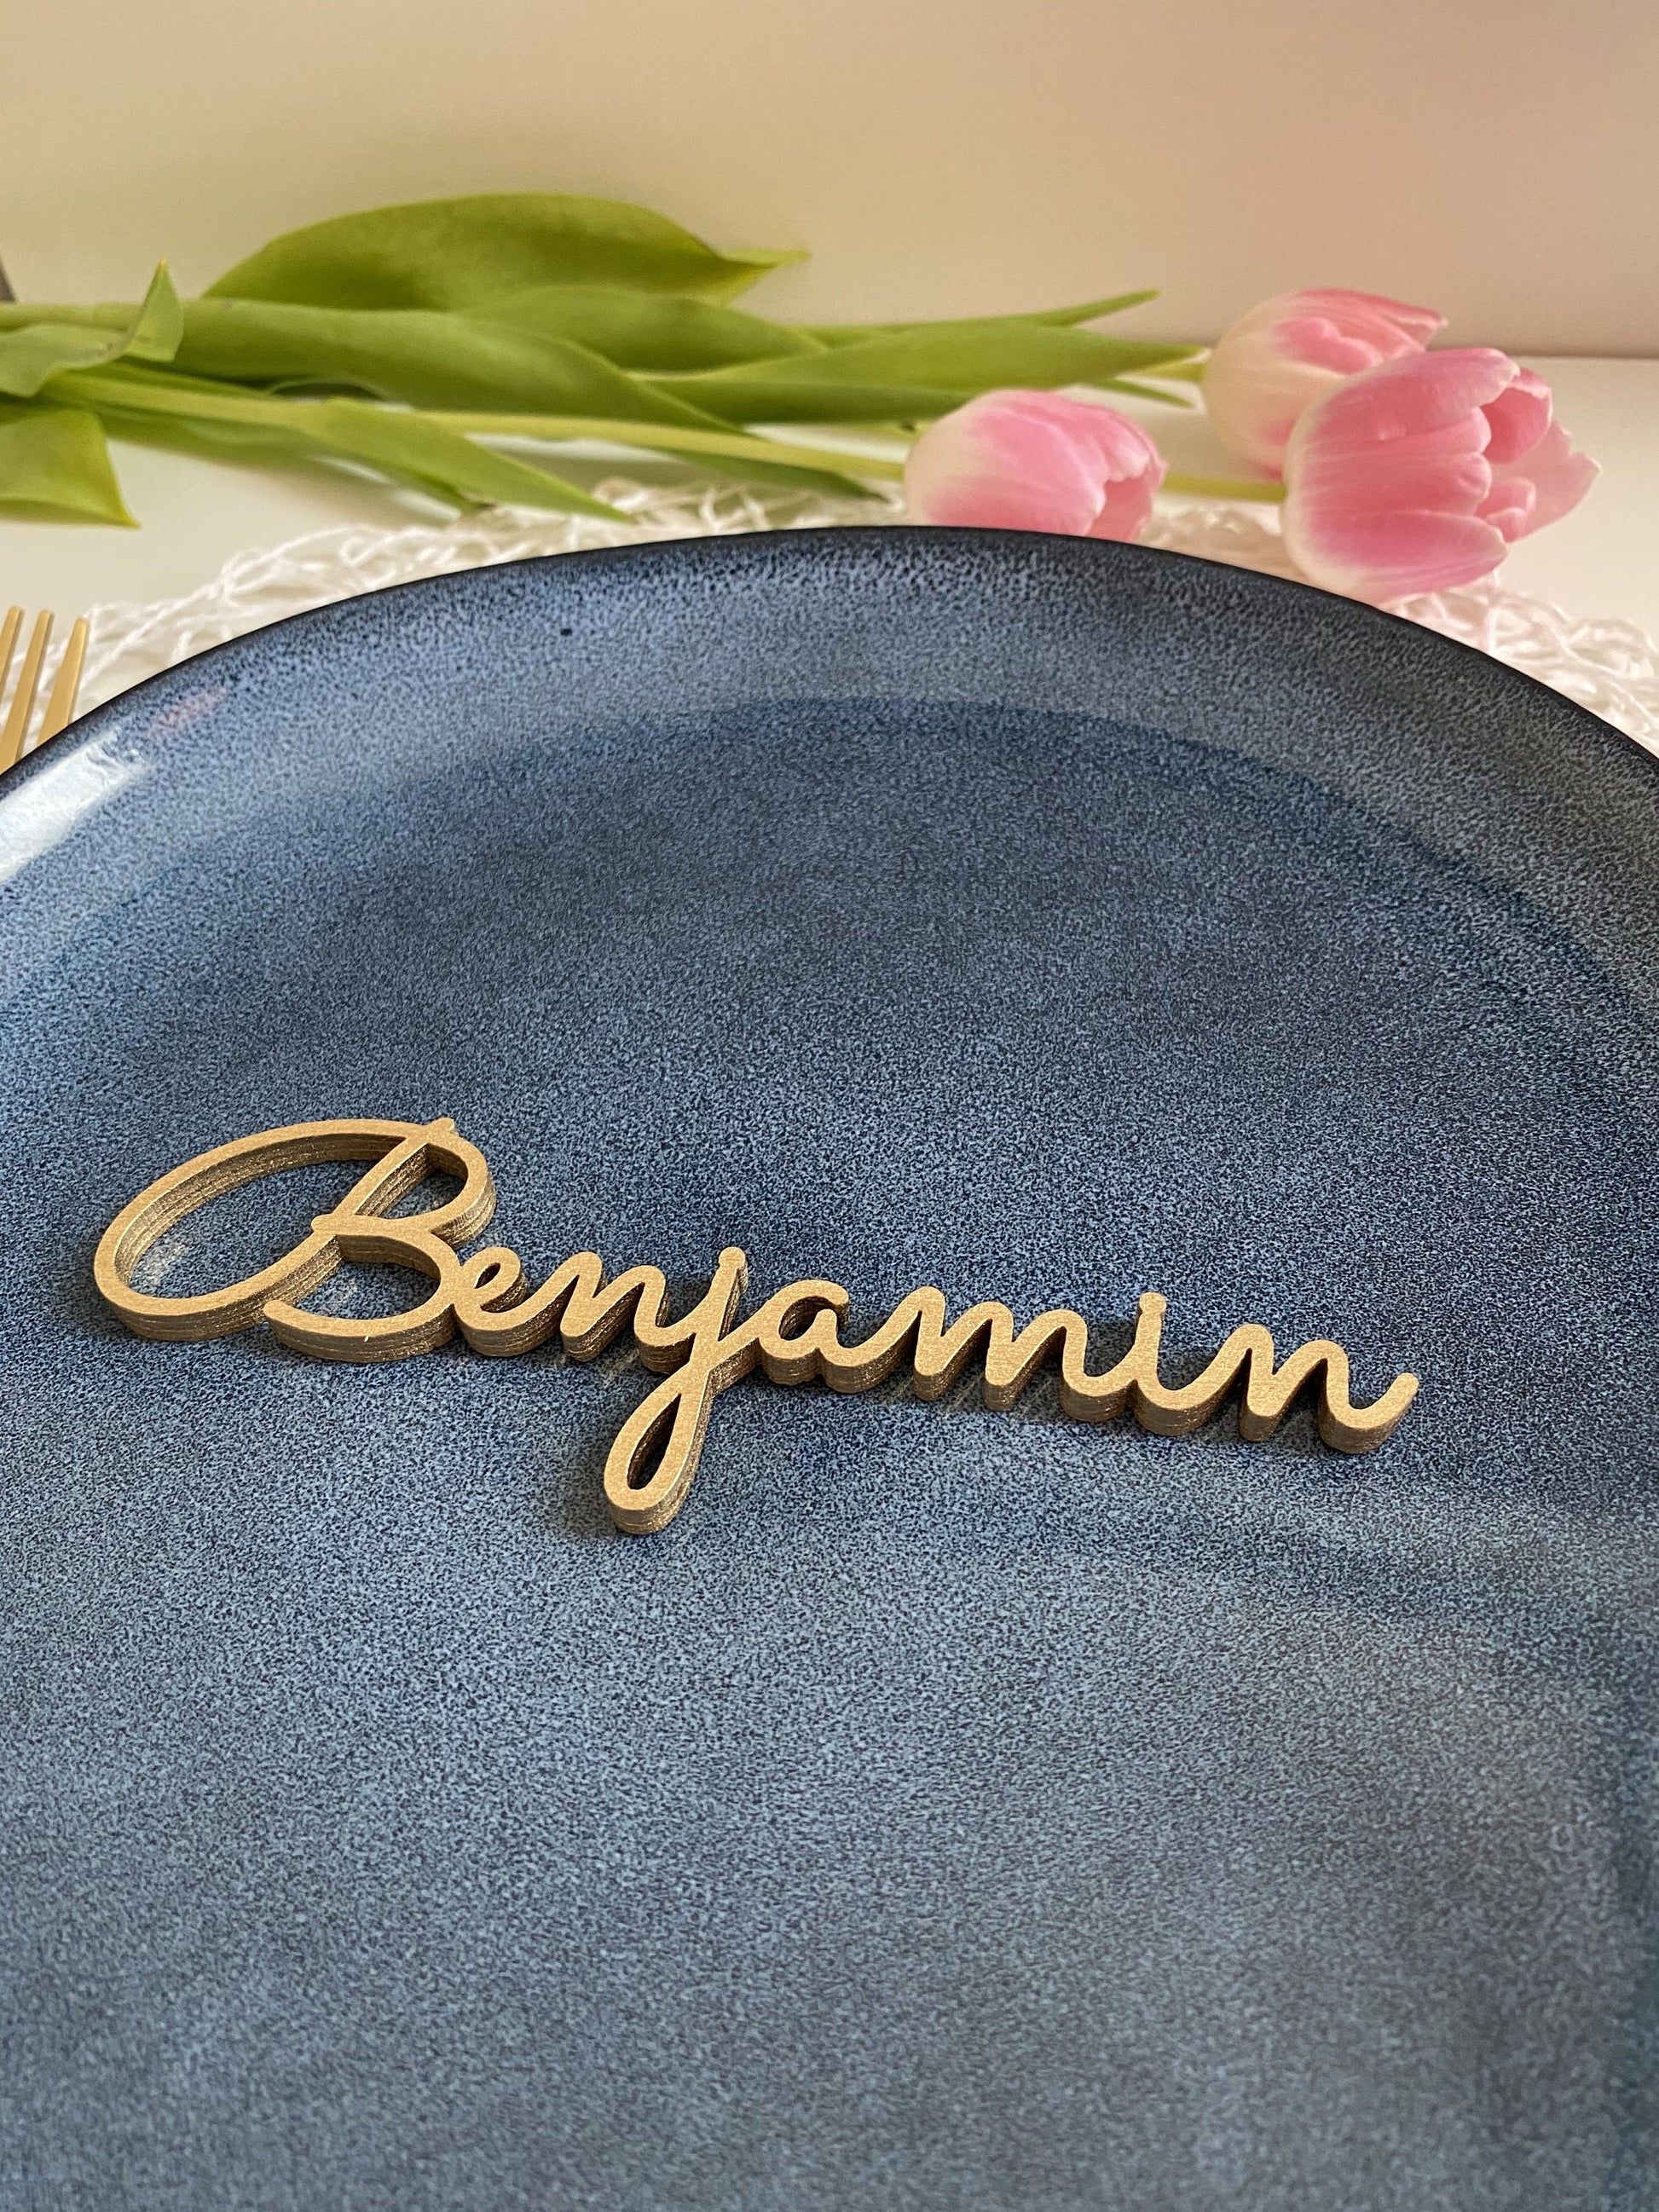 Wedding name cards ,Place Names , Wedding place card, laser cut , Place Setting ,wedding table names , table name cards